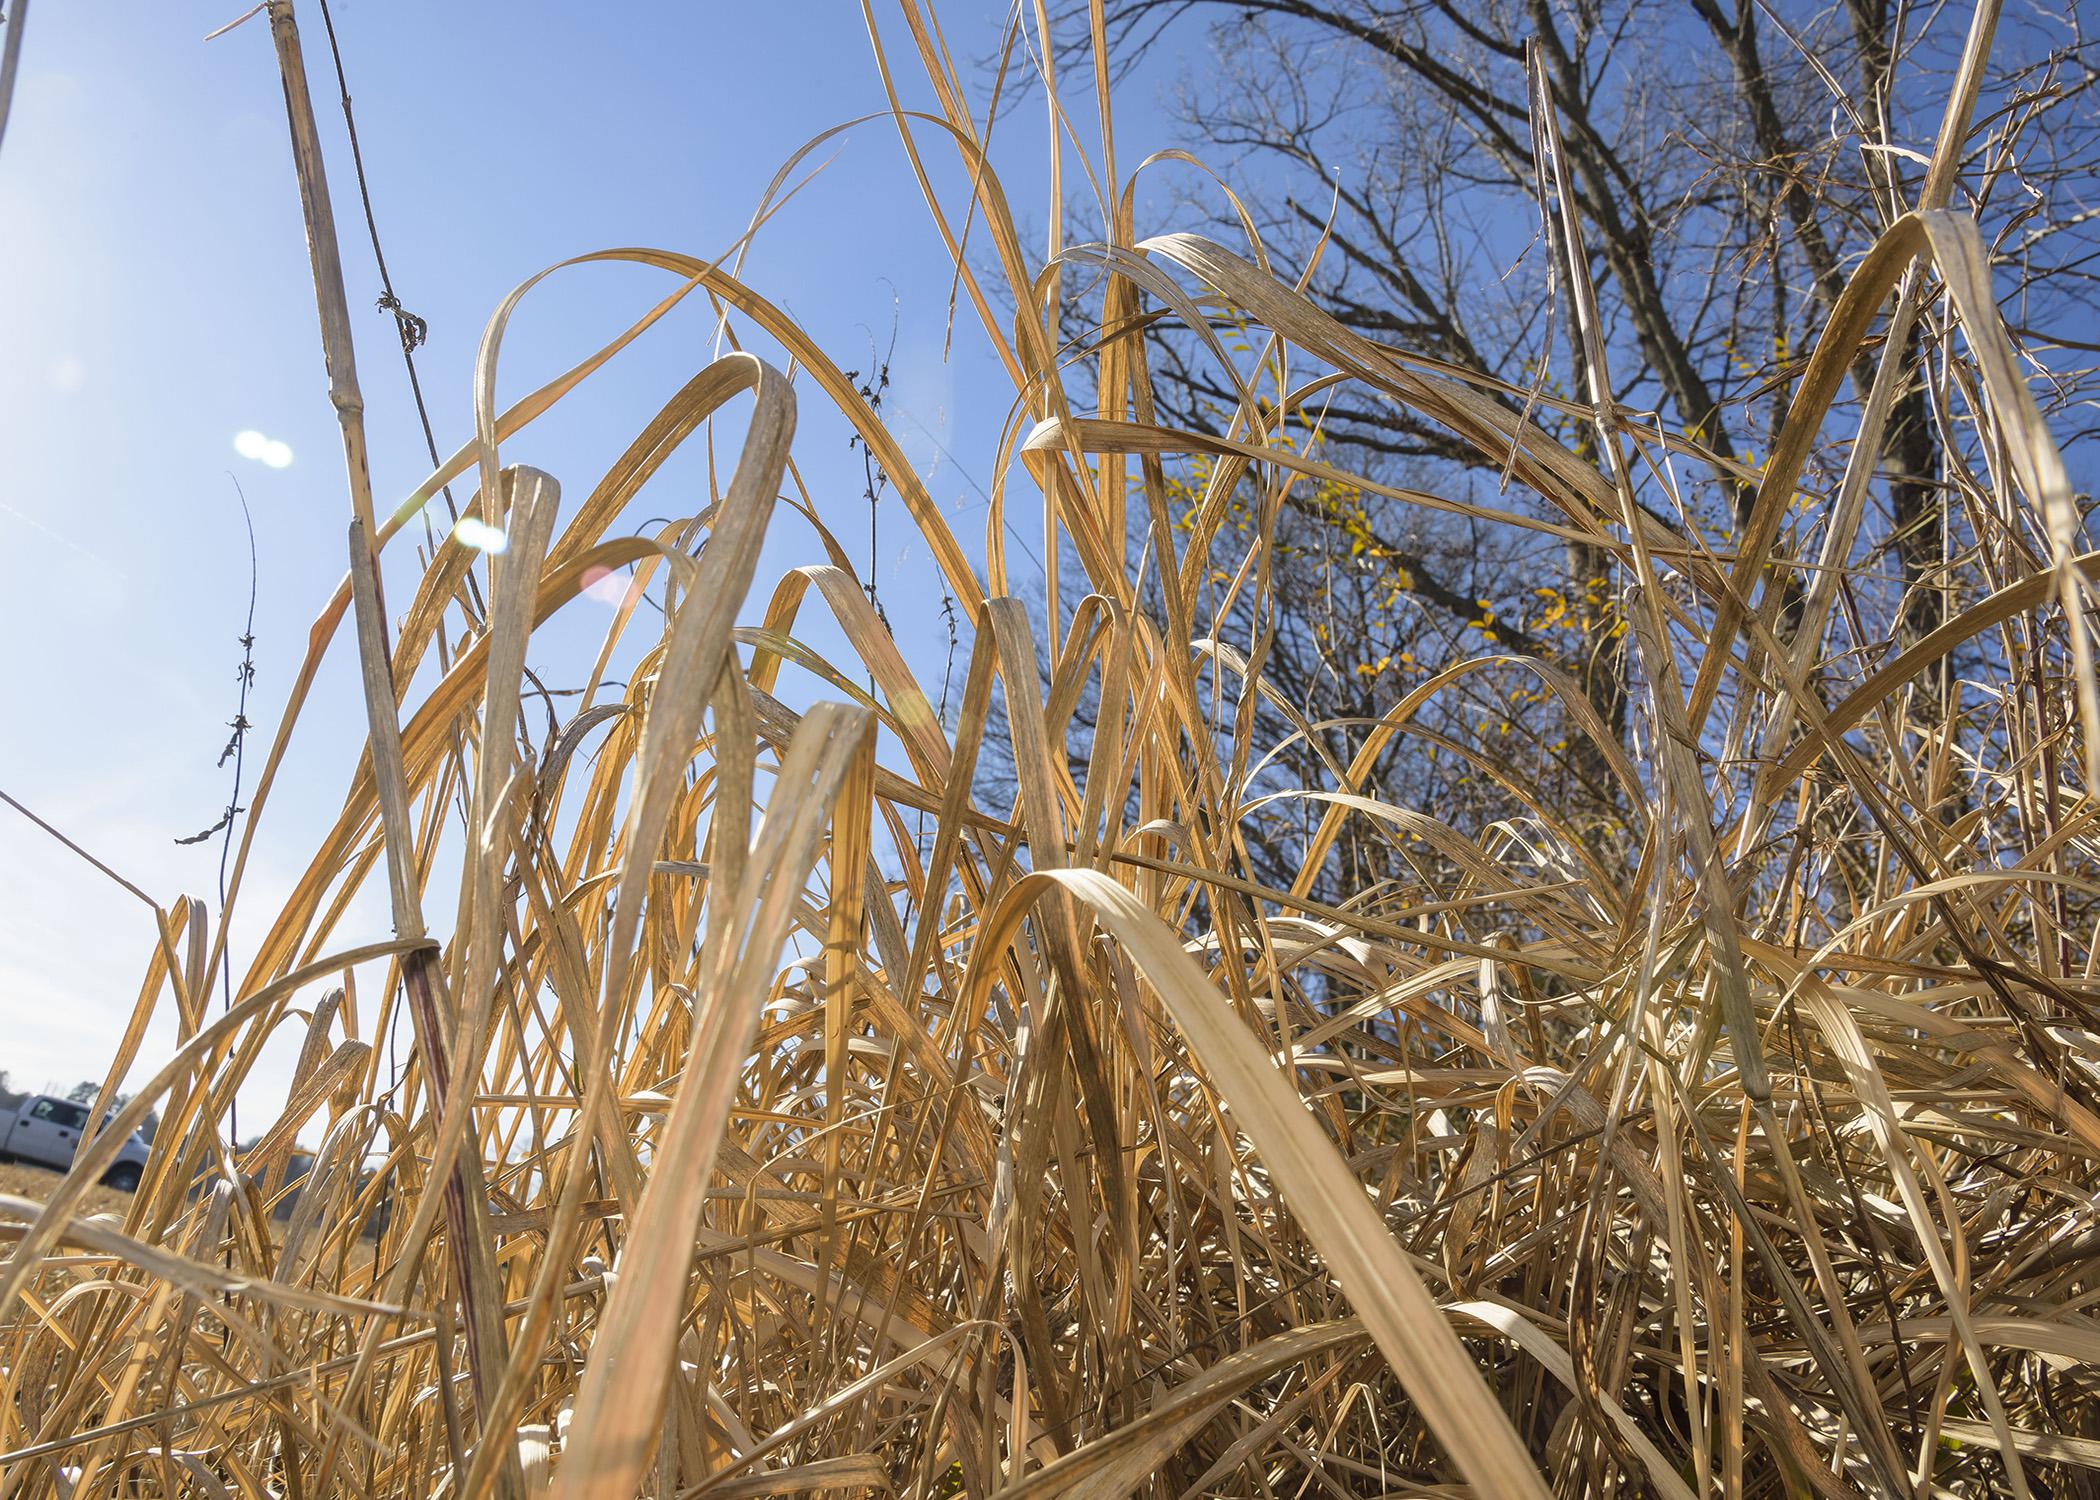 Winter is one of the easiest times of the year to identify cogongrass, which many researchers have classified among the worst weeds in the world. Herbicide treatments applied in the early spring are instrumental in eliminating the noxious weed. (Photo by MSU Ag Communications/Kevin Hudson)